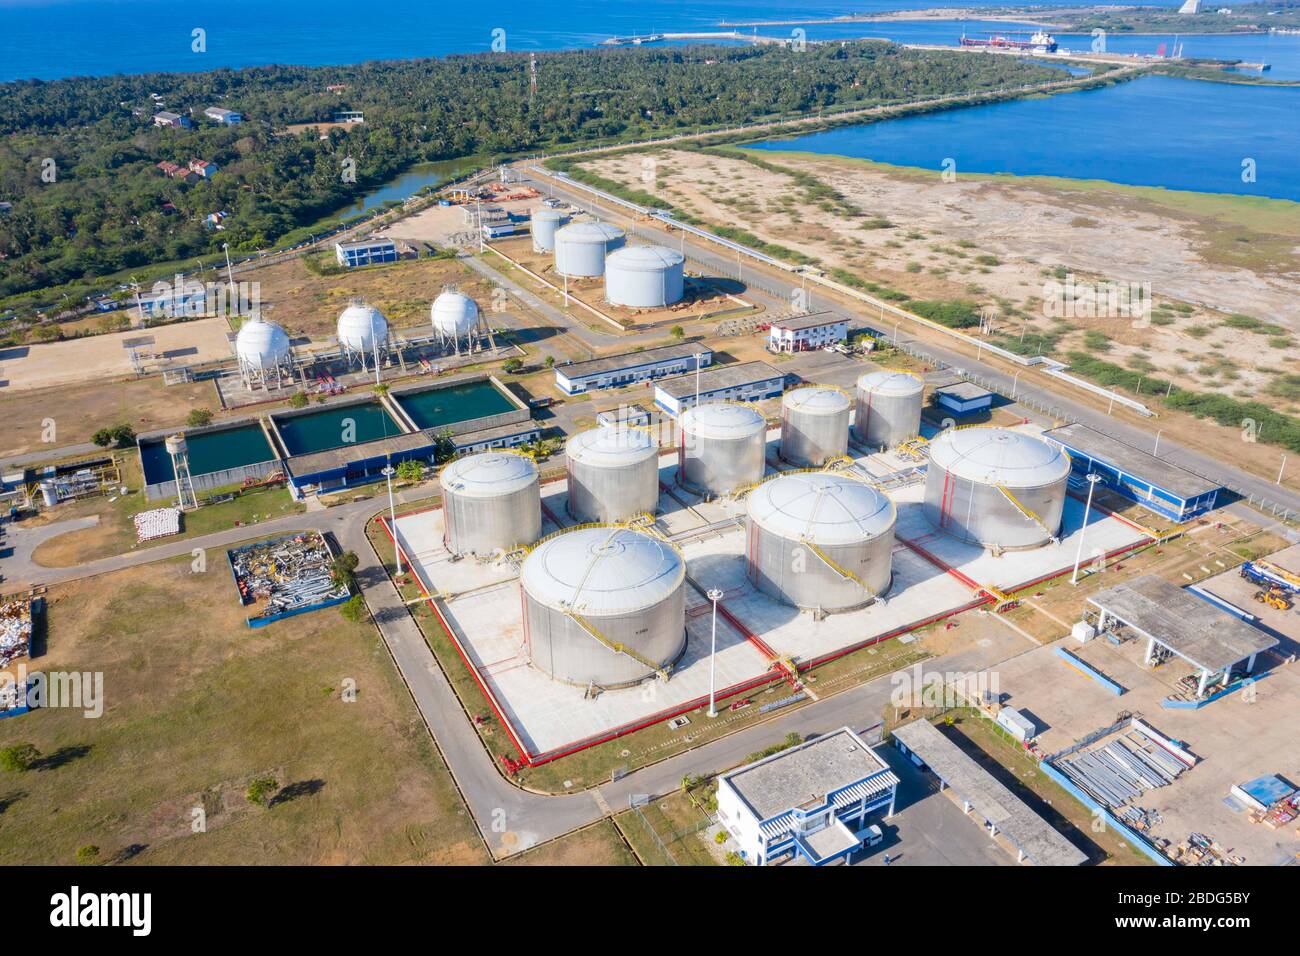 (200408) -- COLOMBO, April 8, 2020 (Xinhua) -- Aerial photo taken on April 6, 2020 shows oil tank area at Hambantota International Port, Sri Lanka. Sri Lanka-China joint venture, Hambantota International Port (HIP), is set to kick off fuel bunkering operations and support COVID-19 affected supply chains after a ship finished discharging low-sulphur fuel into the port's tanks on Tuesday afternoon. TO GO WITH:Sri Lanka's Hambantota port to support COVID-19 affected supply chains with low-sulphur fuel (Photo by Liu Hongru/Xinhua) Stock Photo